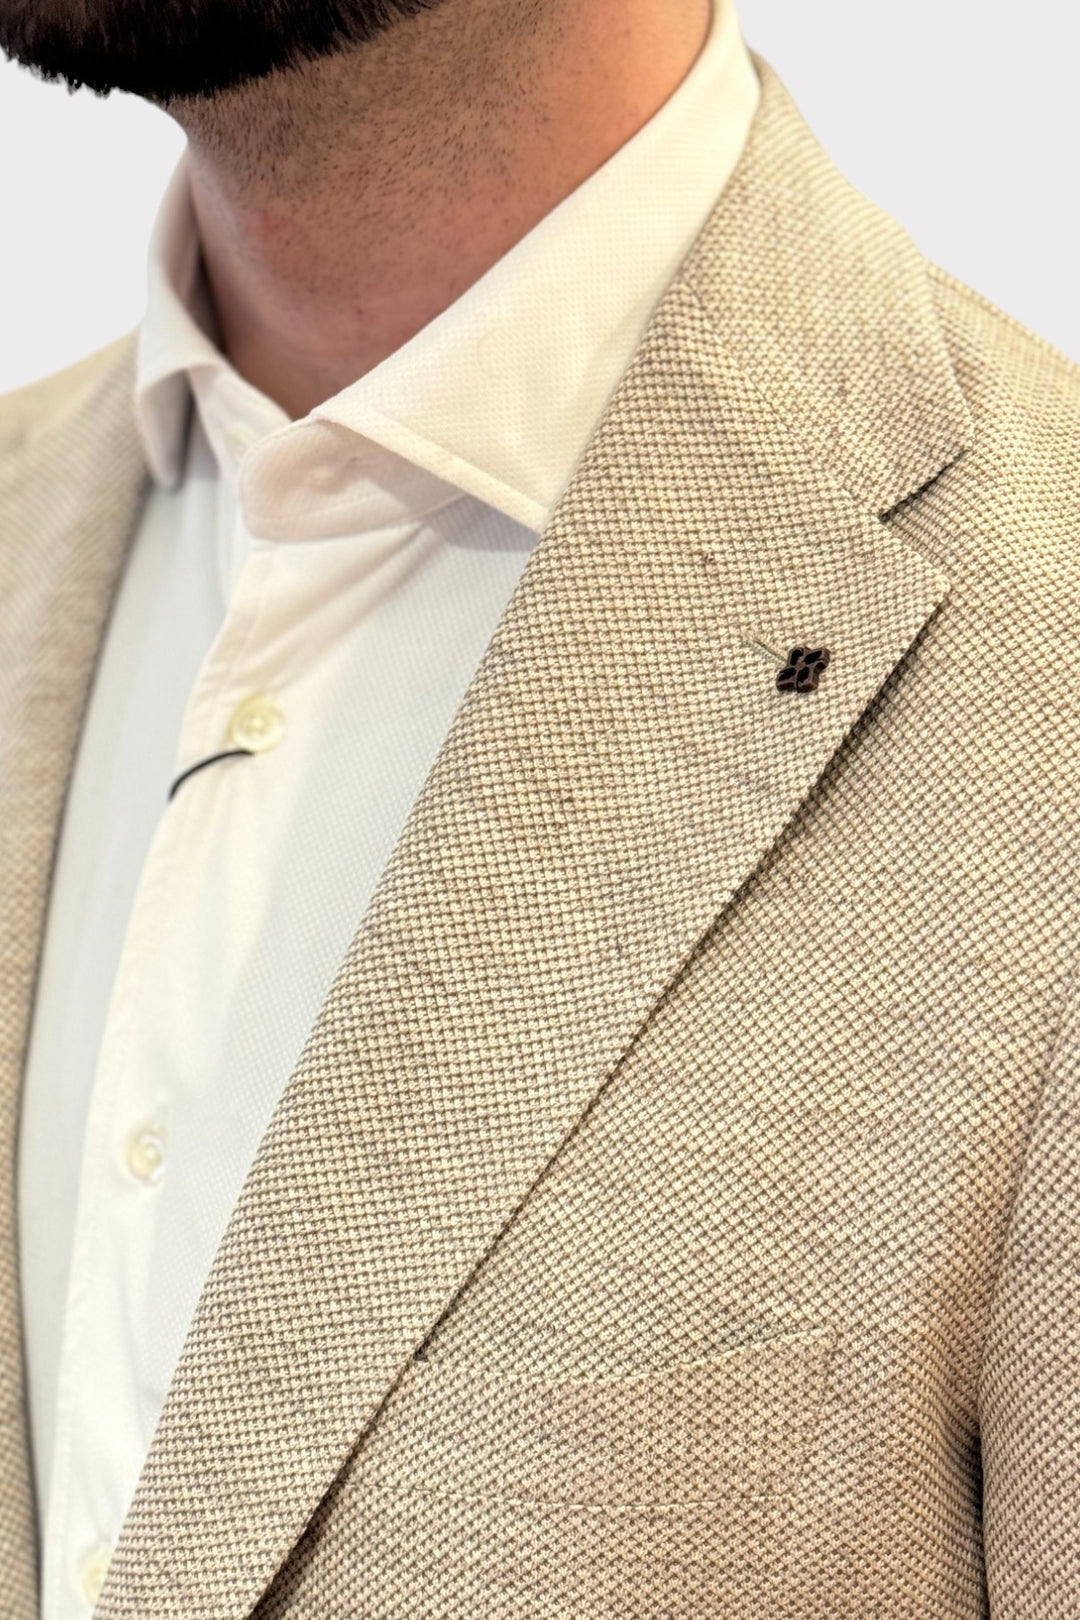 Textured linen and cotton jacket